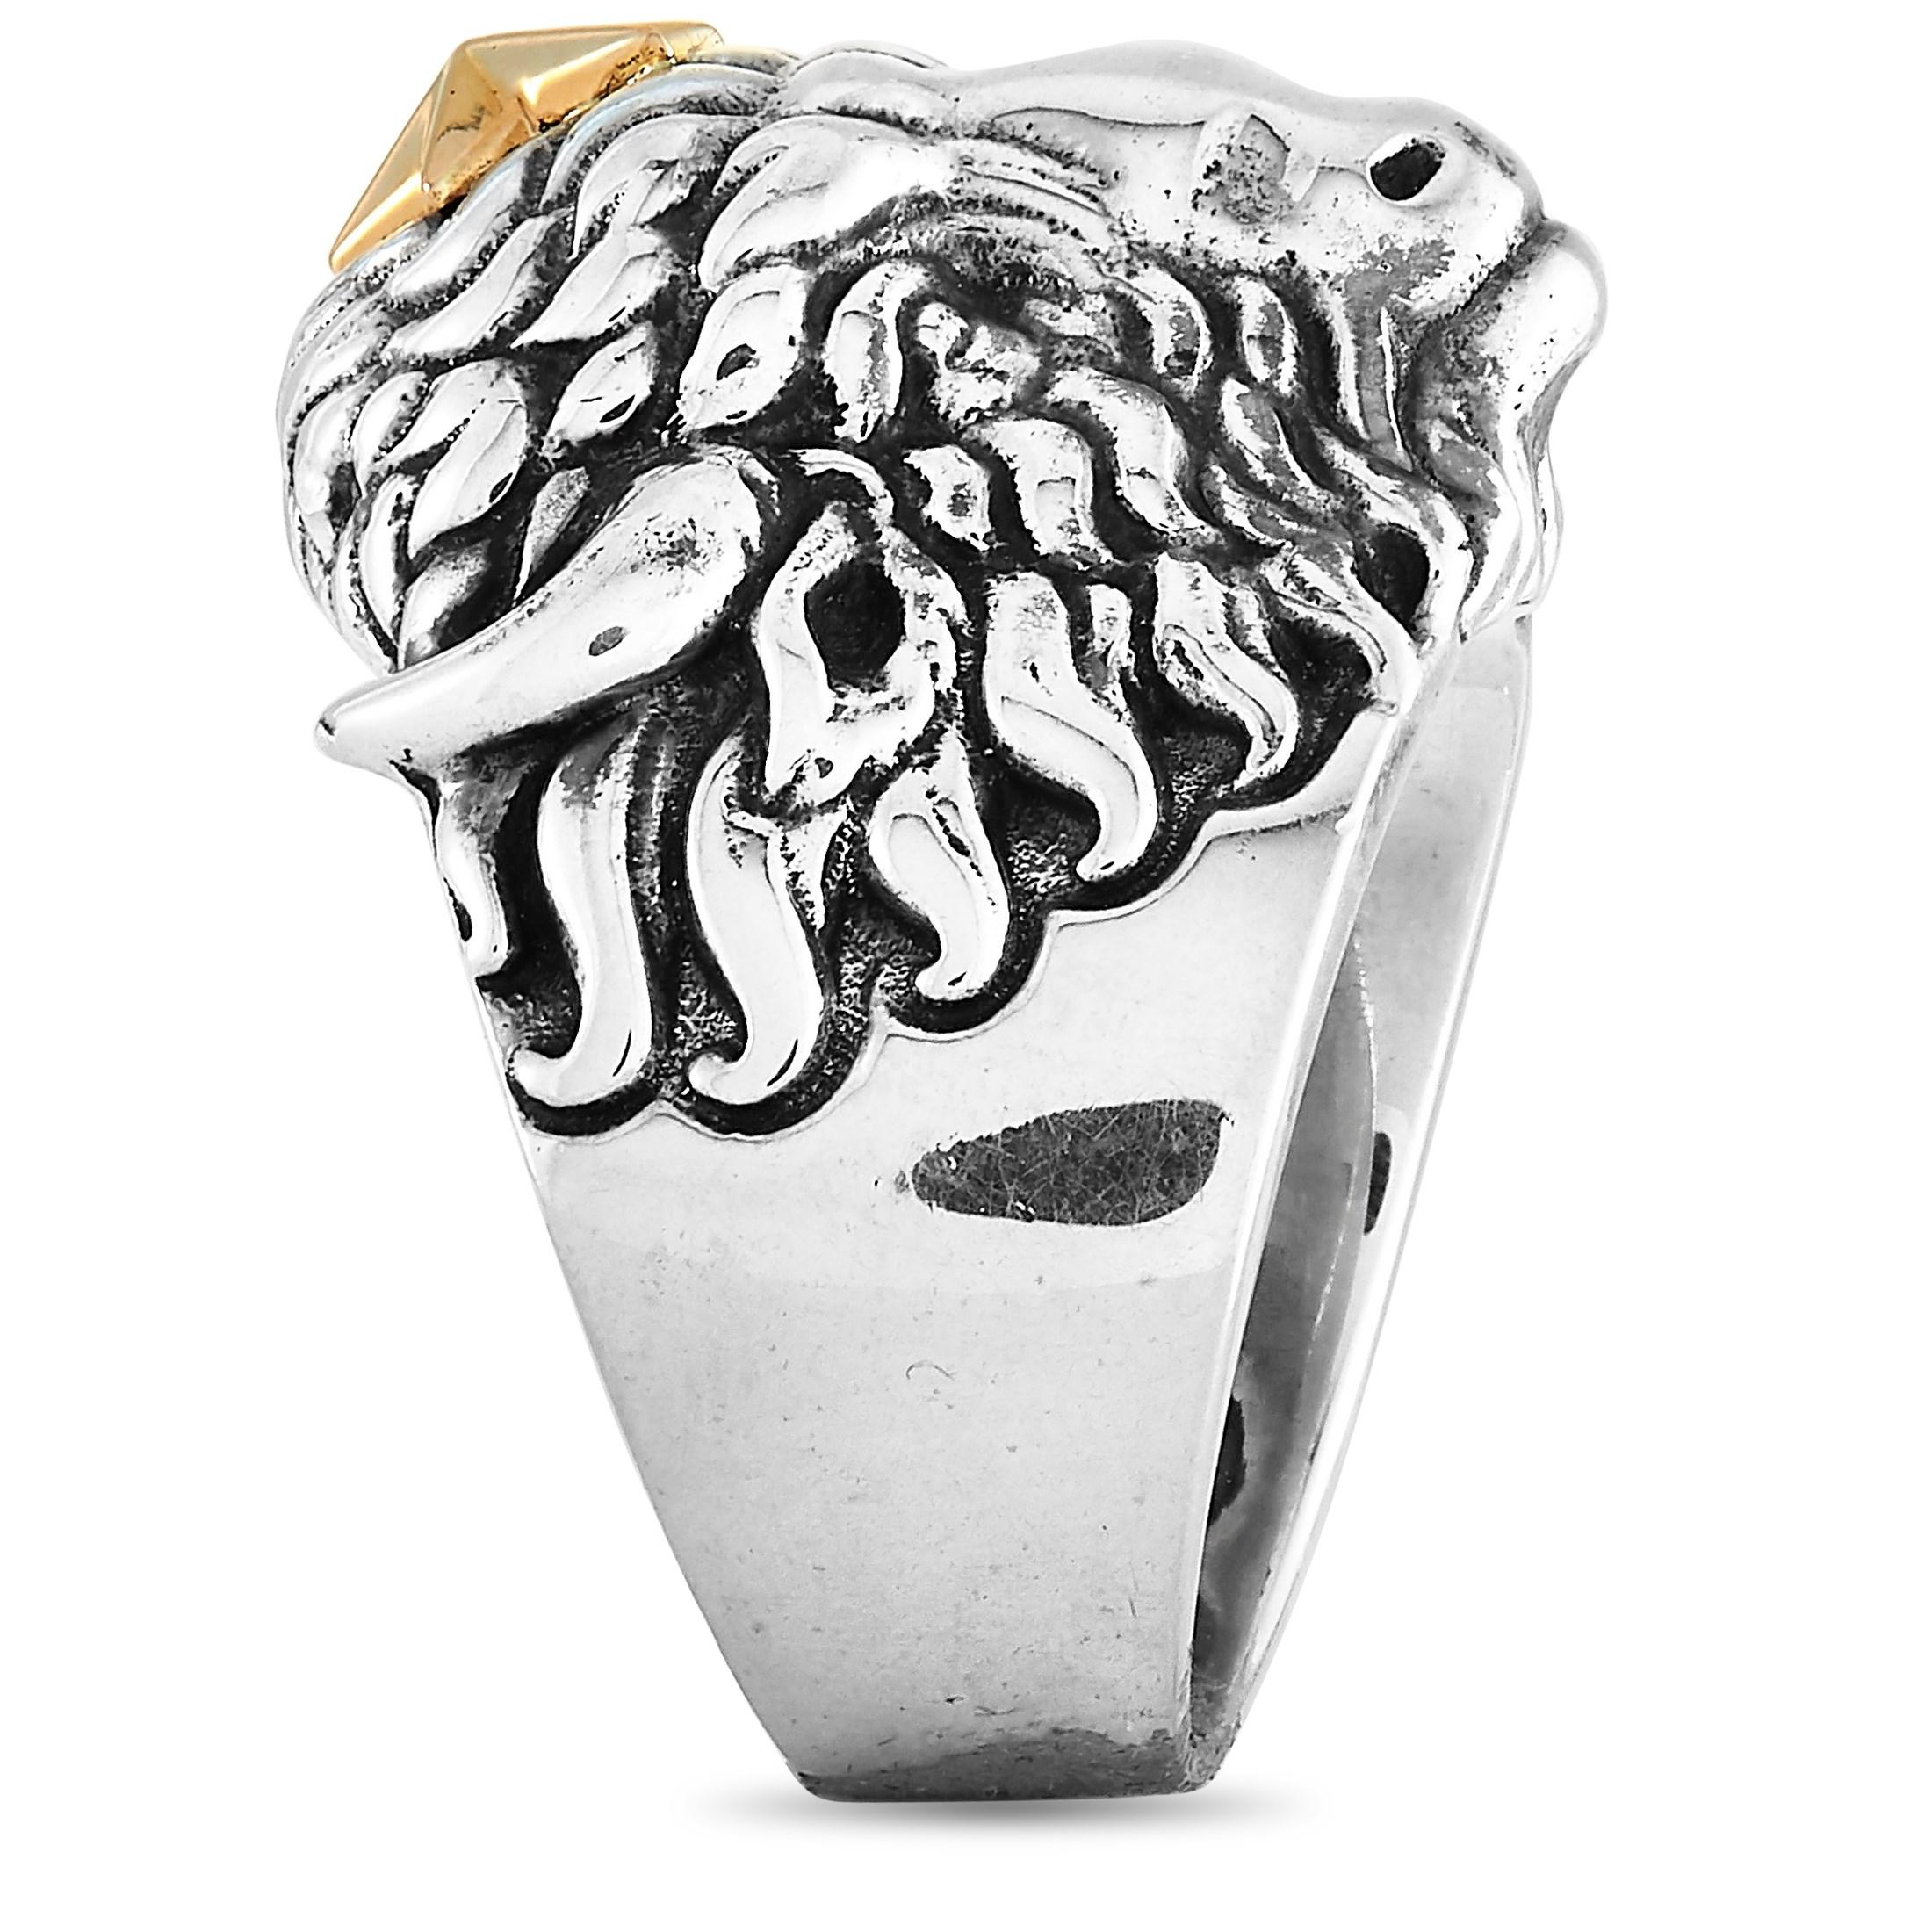 This King Baby ring is crafted from sterling silver and weighs 57 grams. The ring boasts a band thickness of 8 mm and a top height of 12 mm, while the top dimensions measure 25 by 27 mm.

Offered in brand-new condition, this item includes the